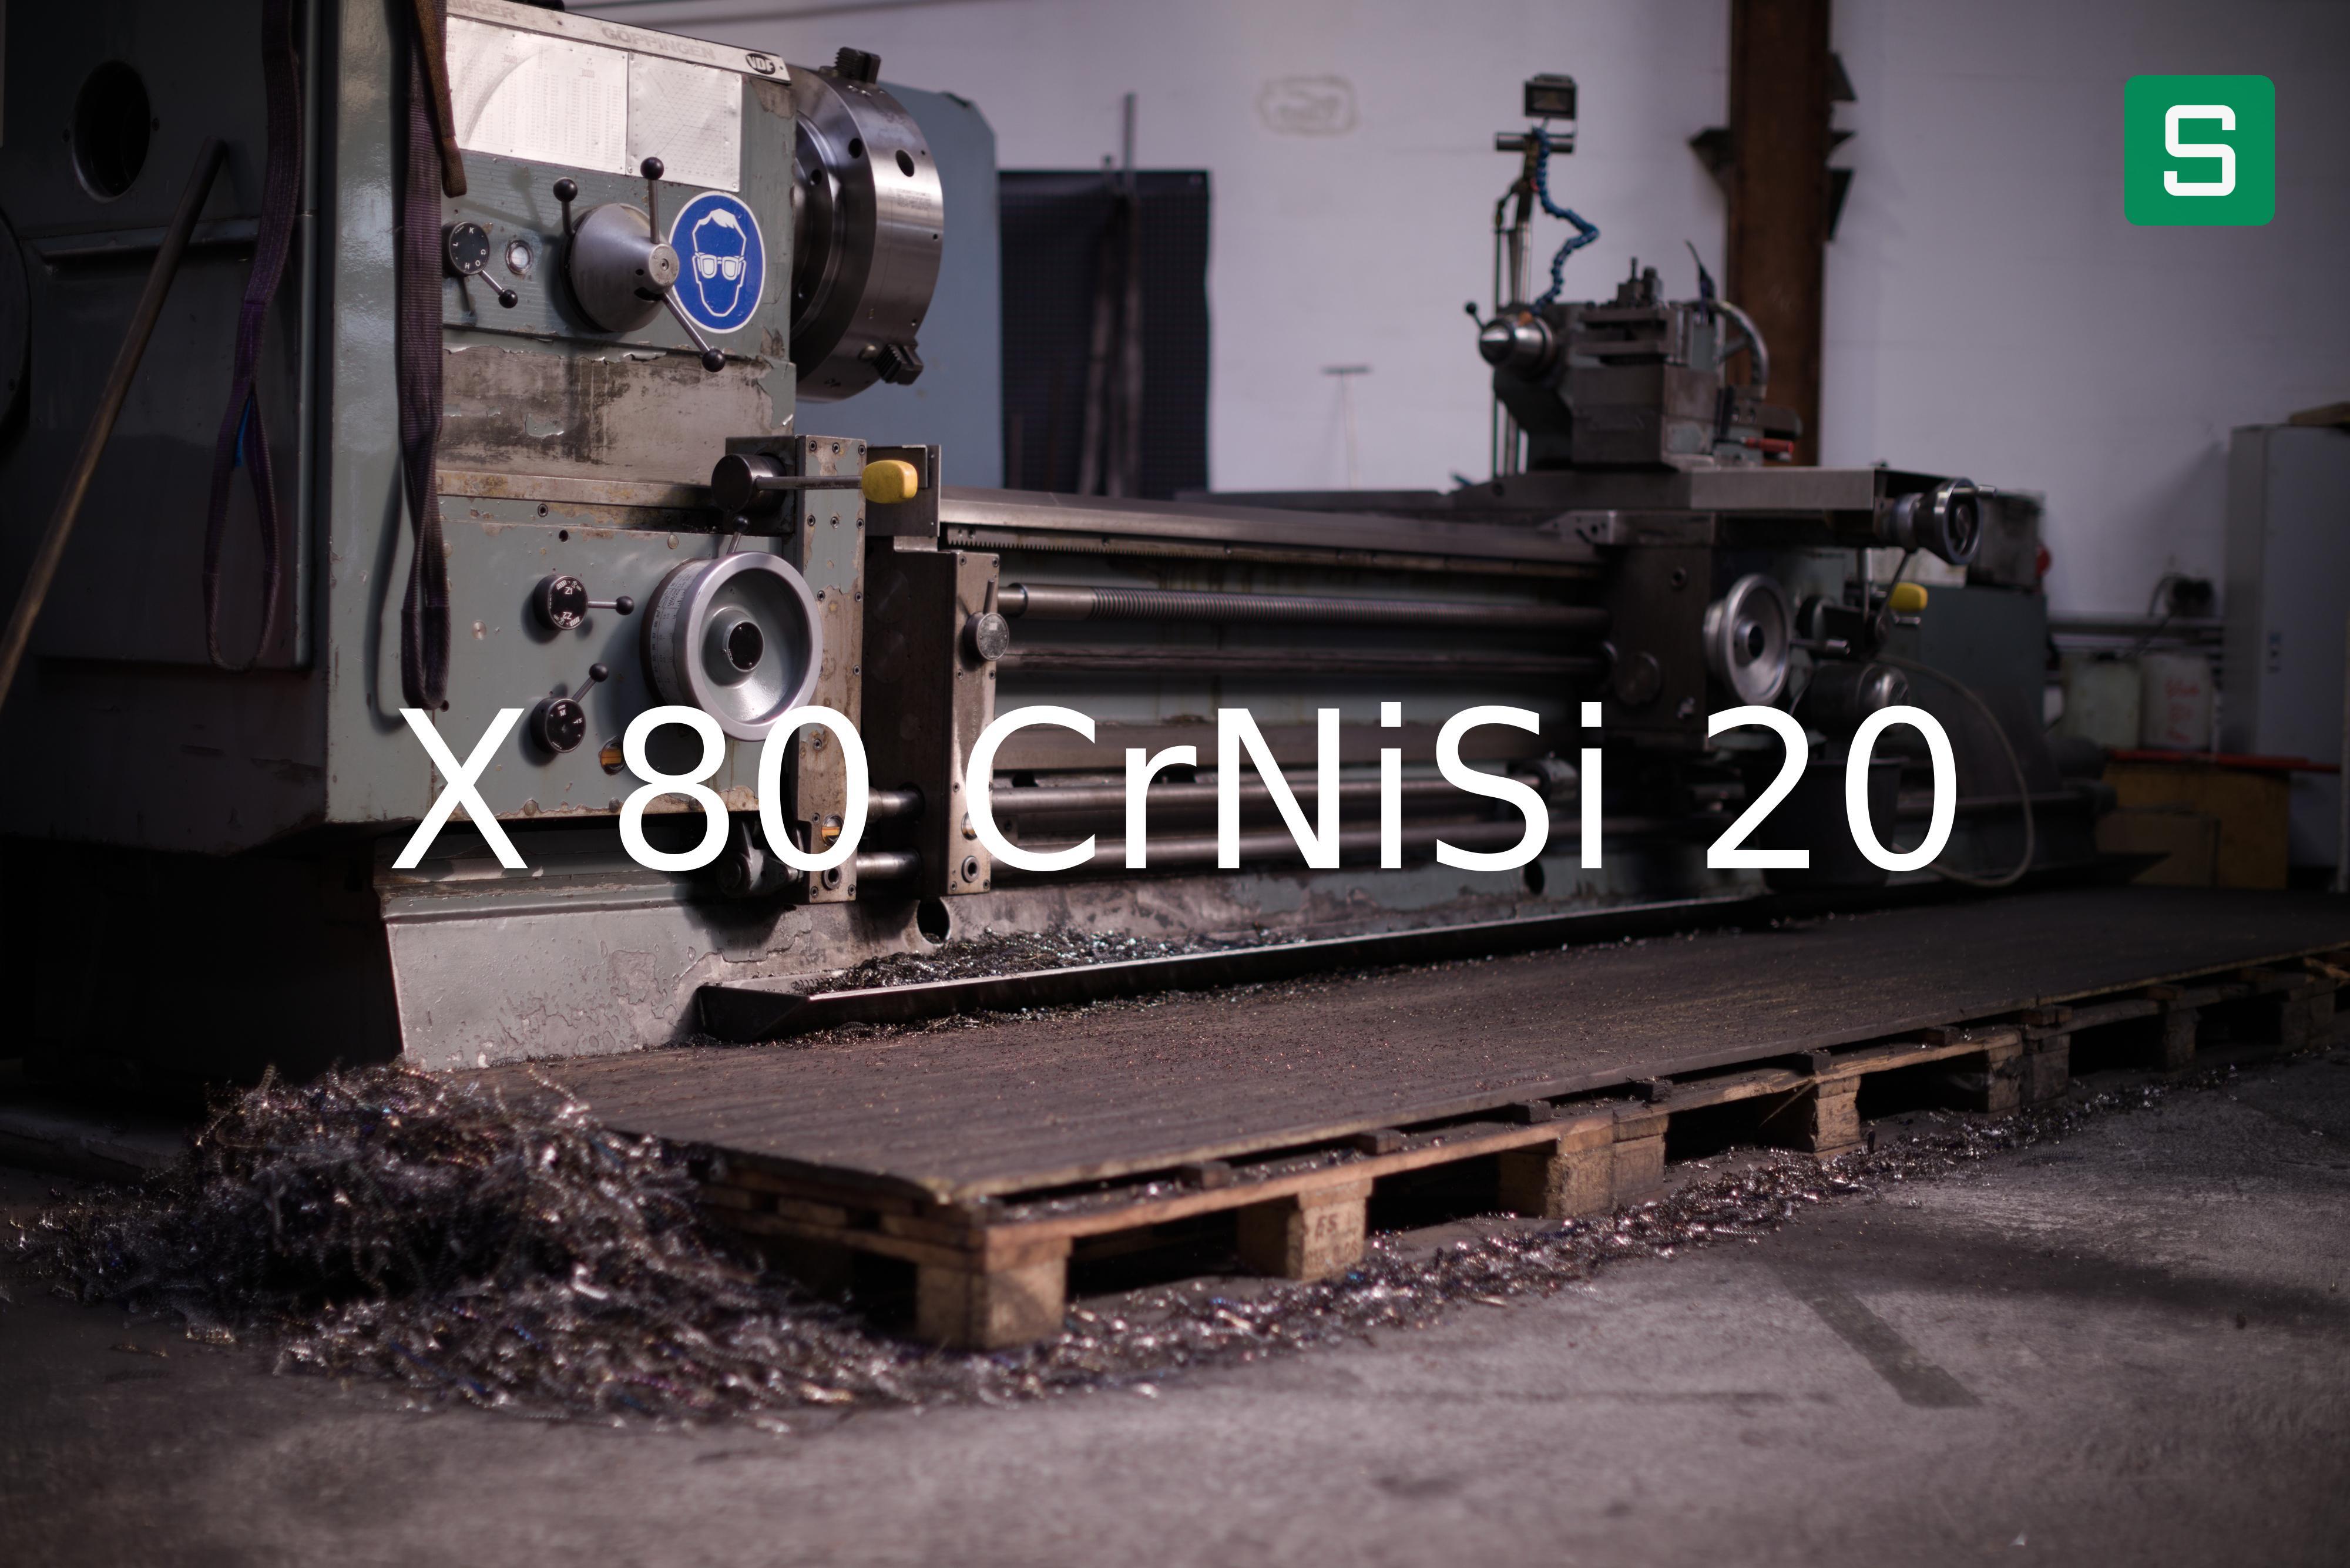 Steel Material: X 80 CrNiSi 20